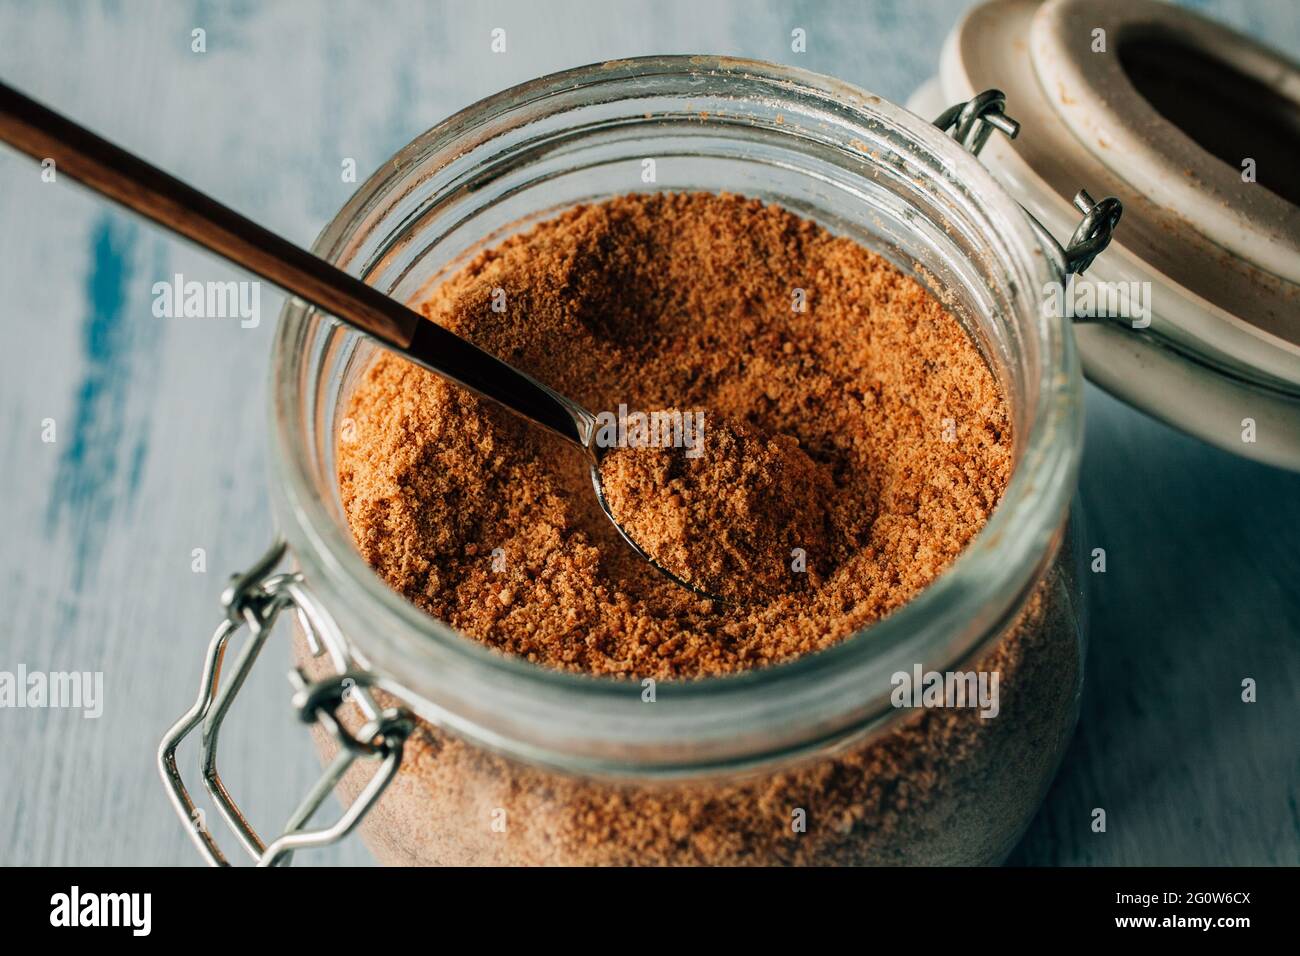 Panela sugar background. Close up view of raw cane sugar in a jar. Stock Photo